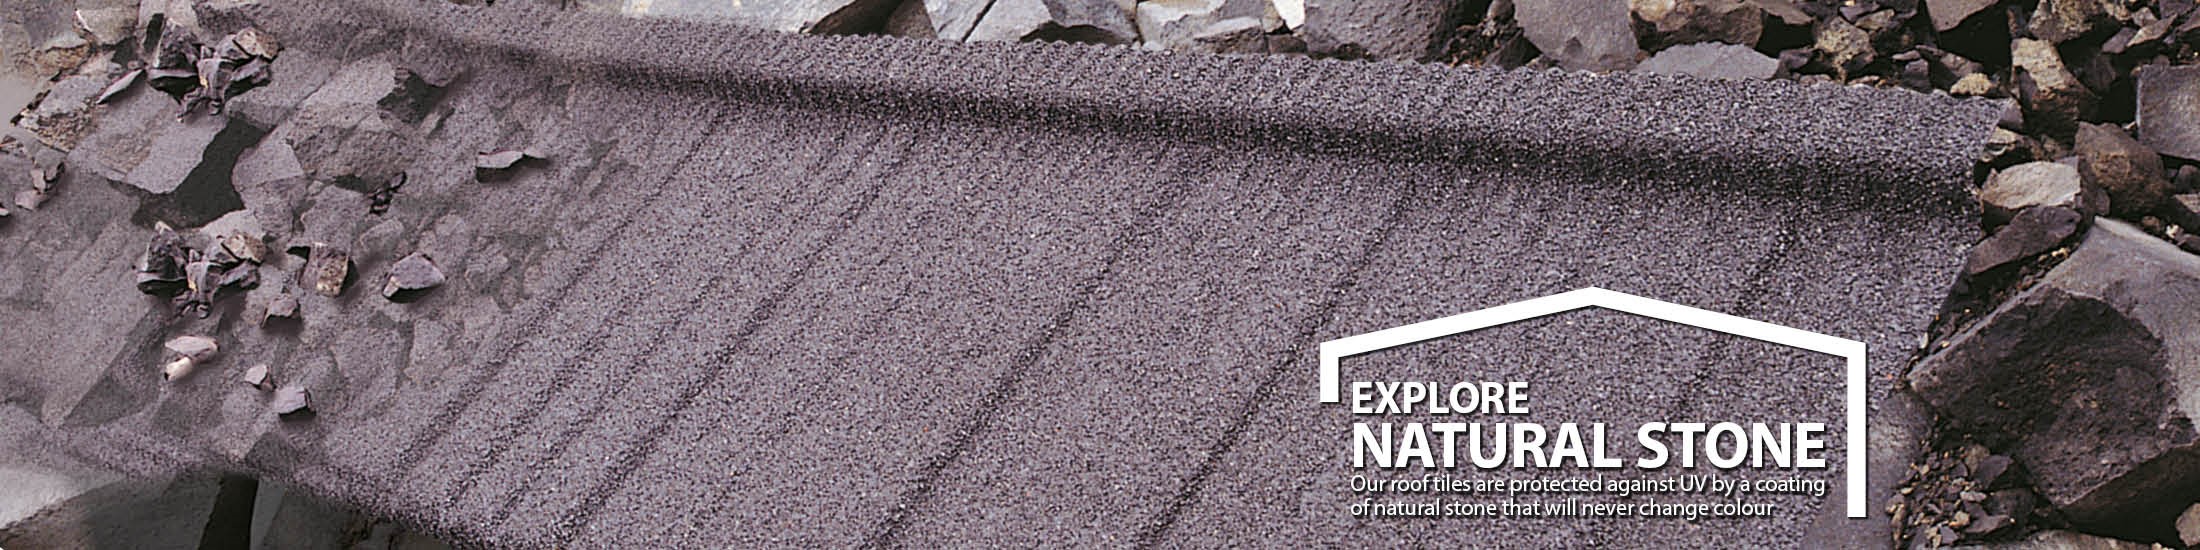 Natural Stone Coated Roof Tiles | Decra Roofing Systems Kenya 1